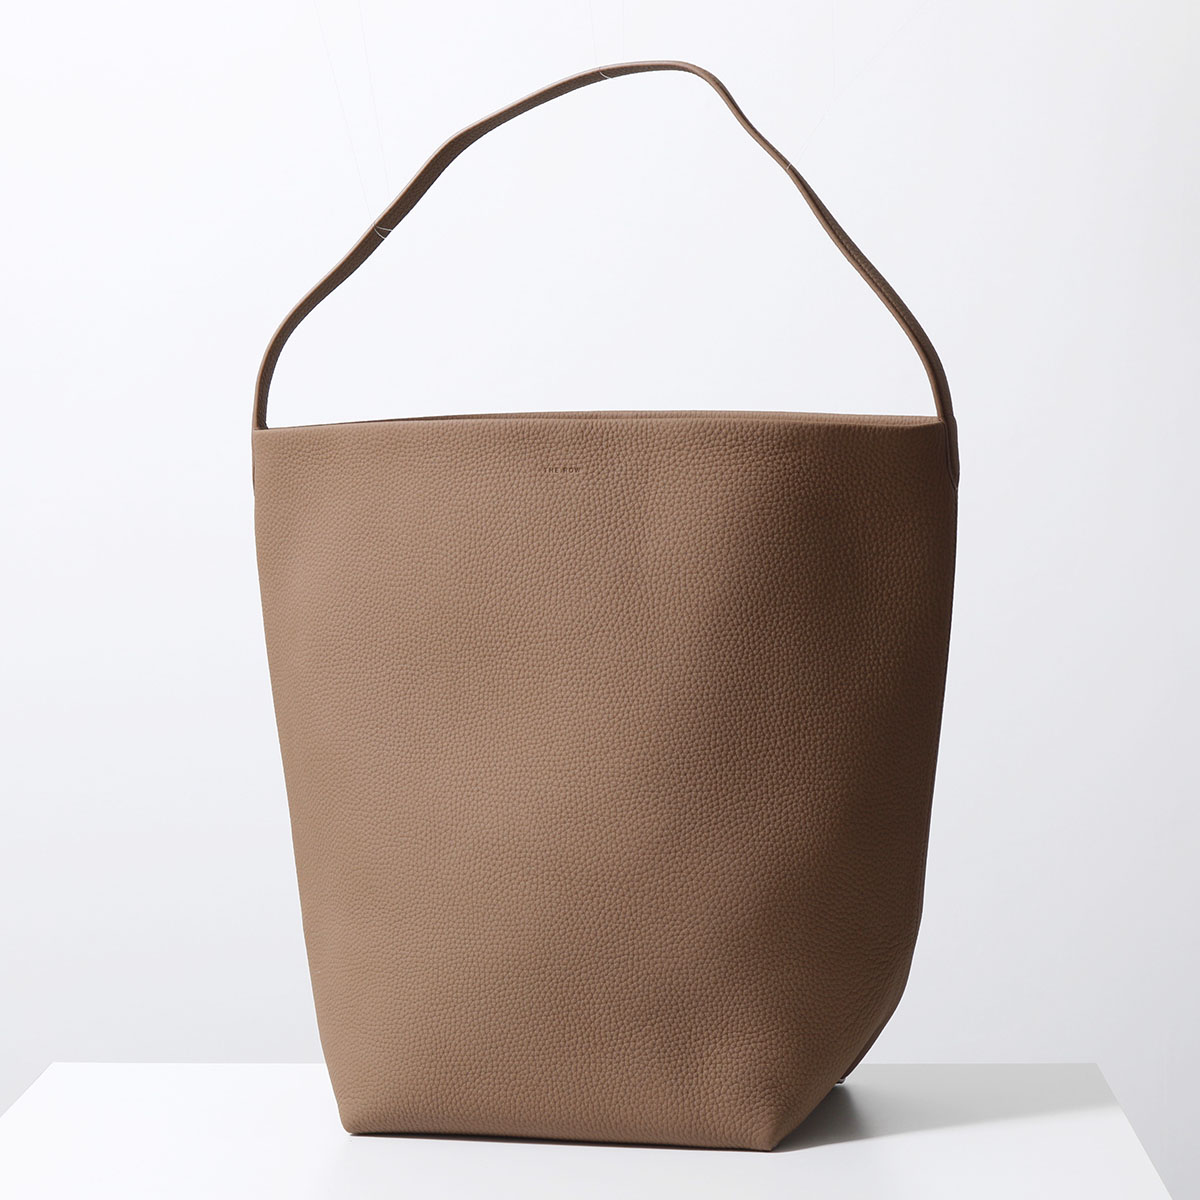 THE ROW ザ・ロウ トートバッグ LARGE N/S PARK TOTE ラージ パーク W1...